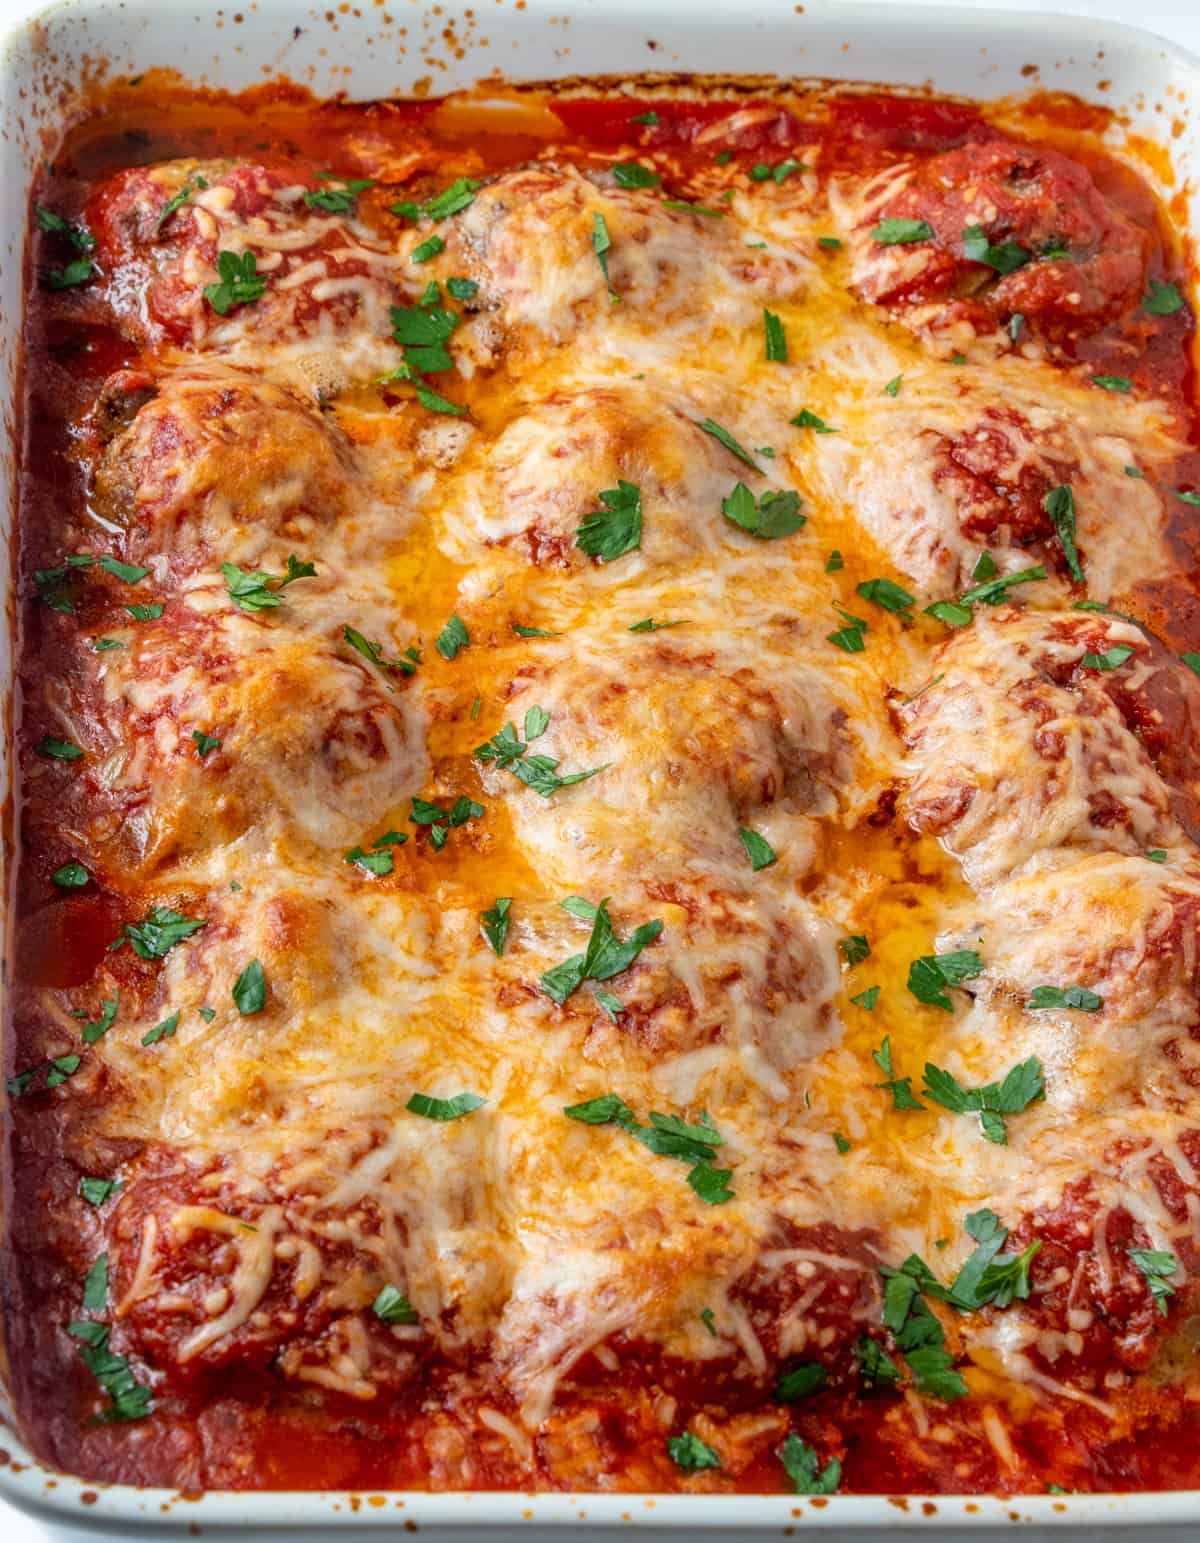 Meatballs in baking dish with melted cheese and sauce topped with parsley